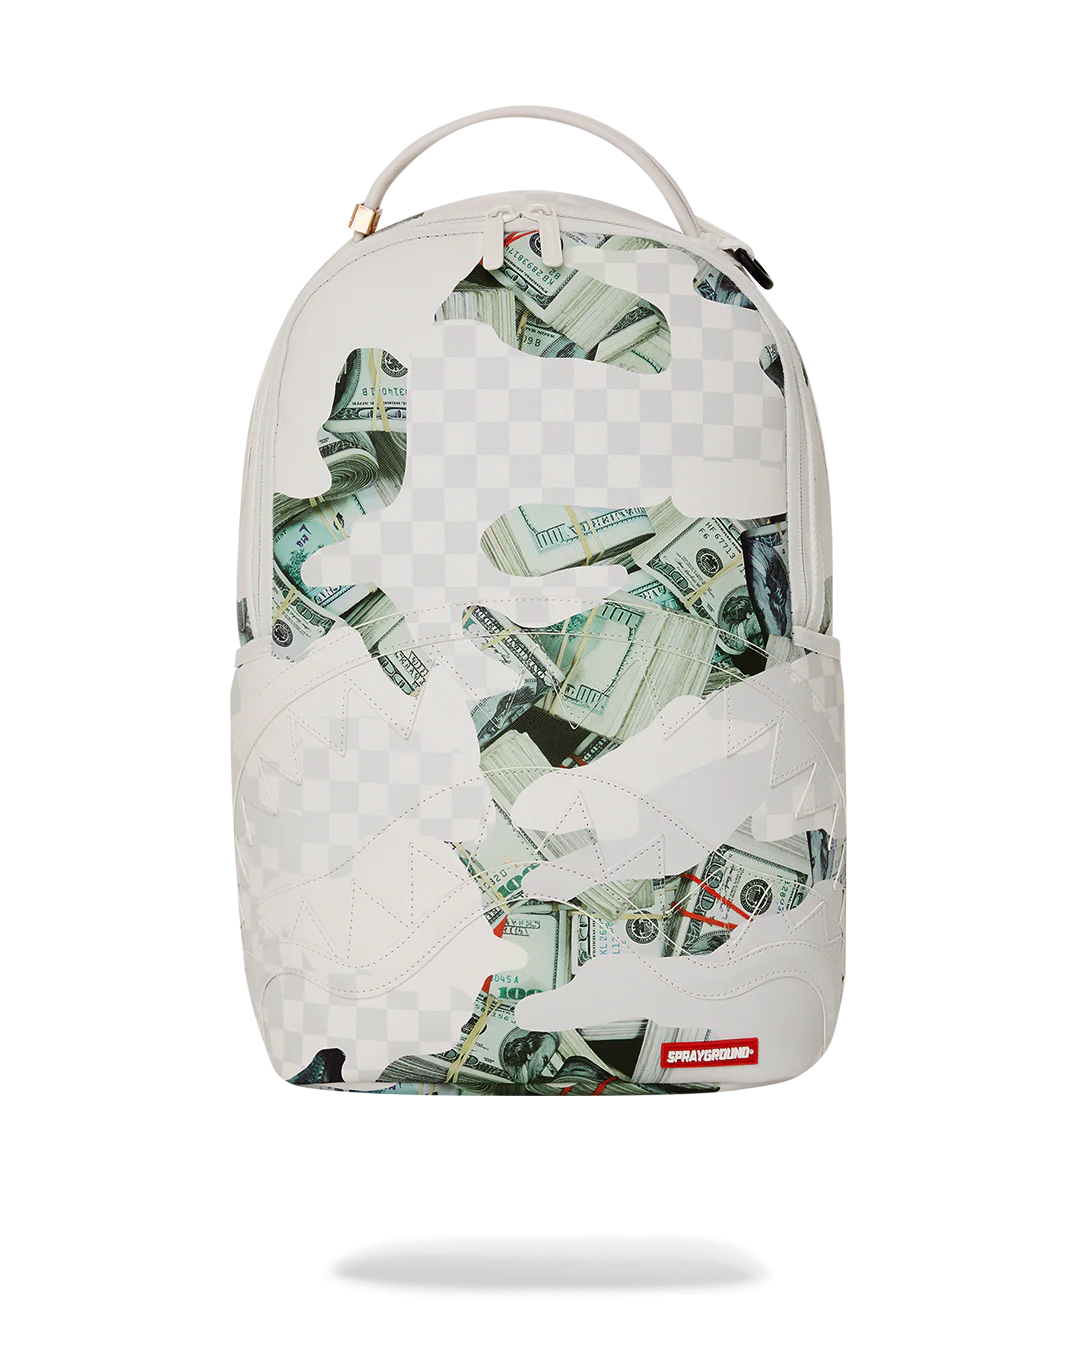 Sprayground 3am Le Blanc Tech Backpack in White for Men